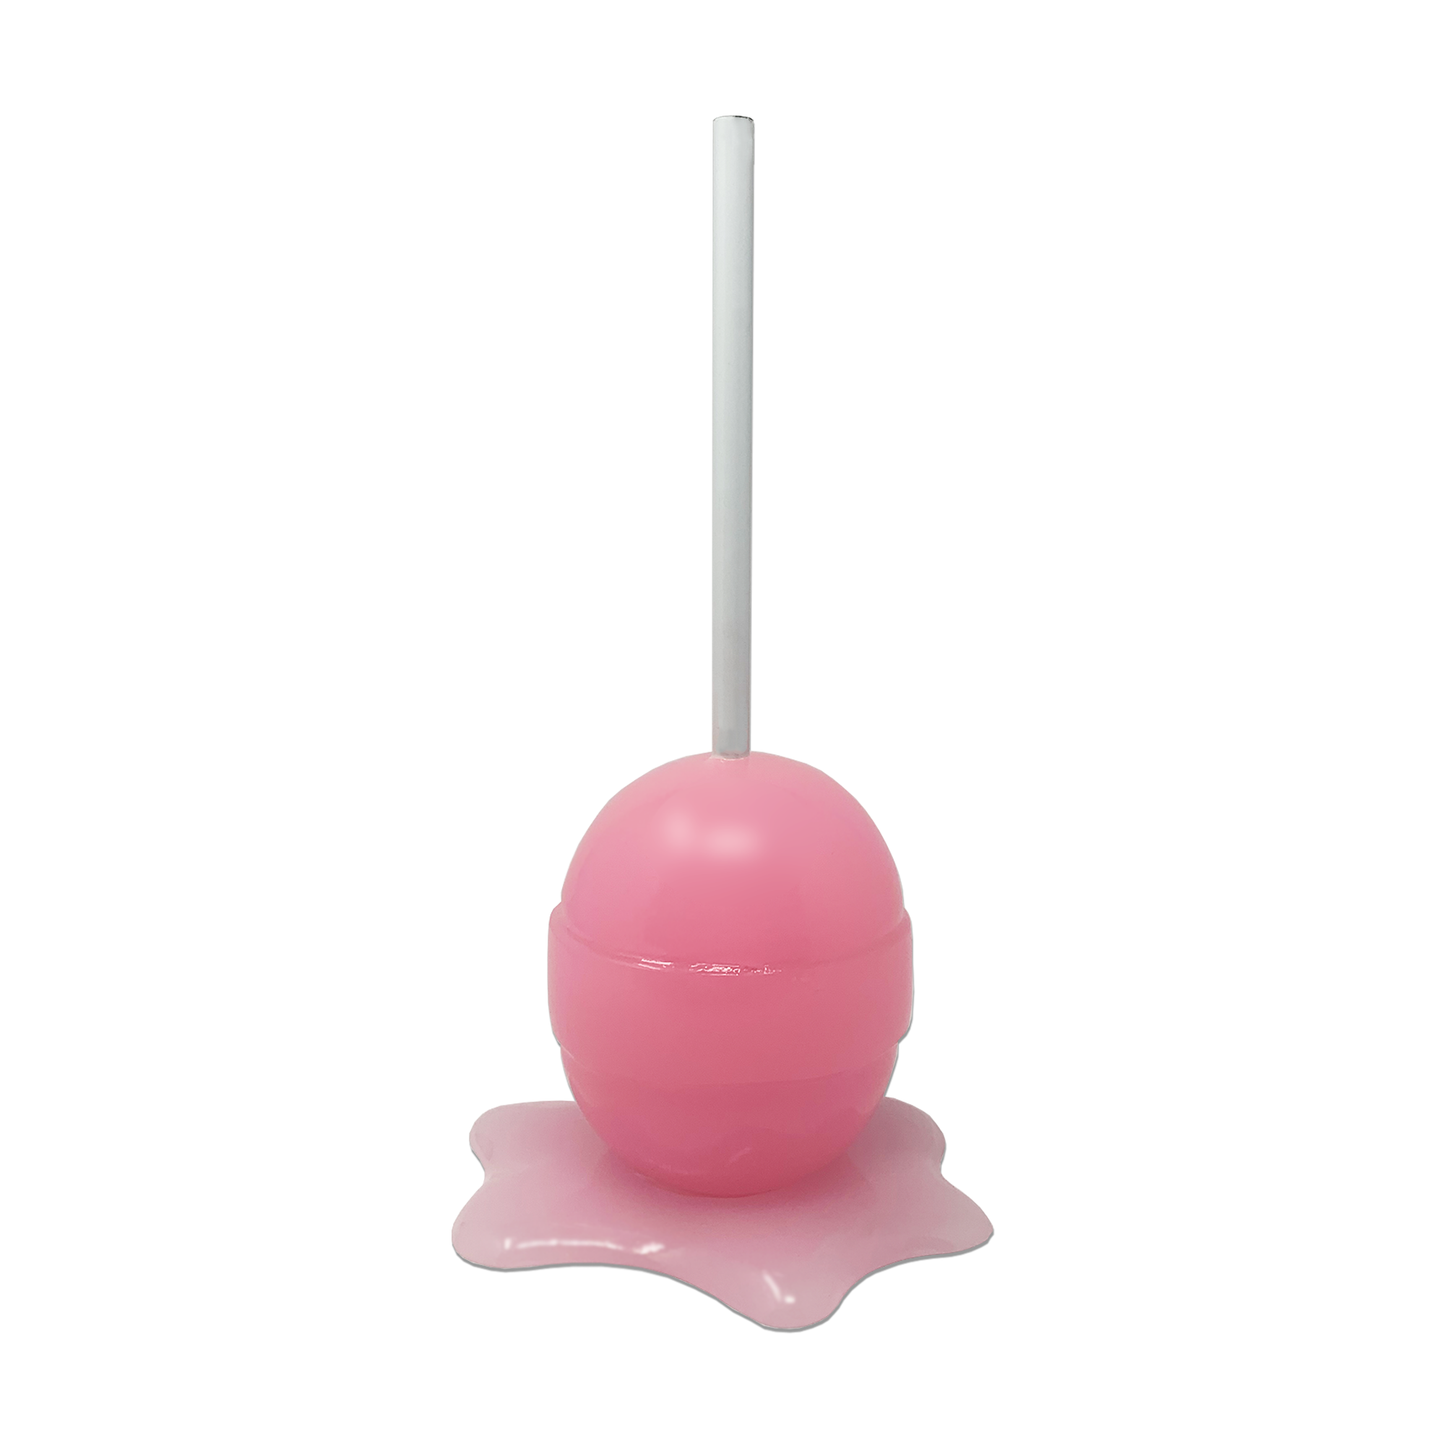 LARGE PRETTY IN PINK MELTING BLOW POP RESIN SCULPTURE